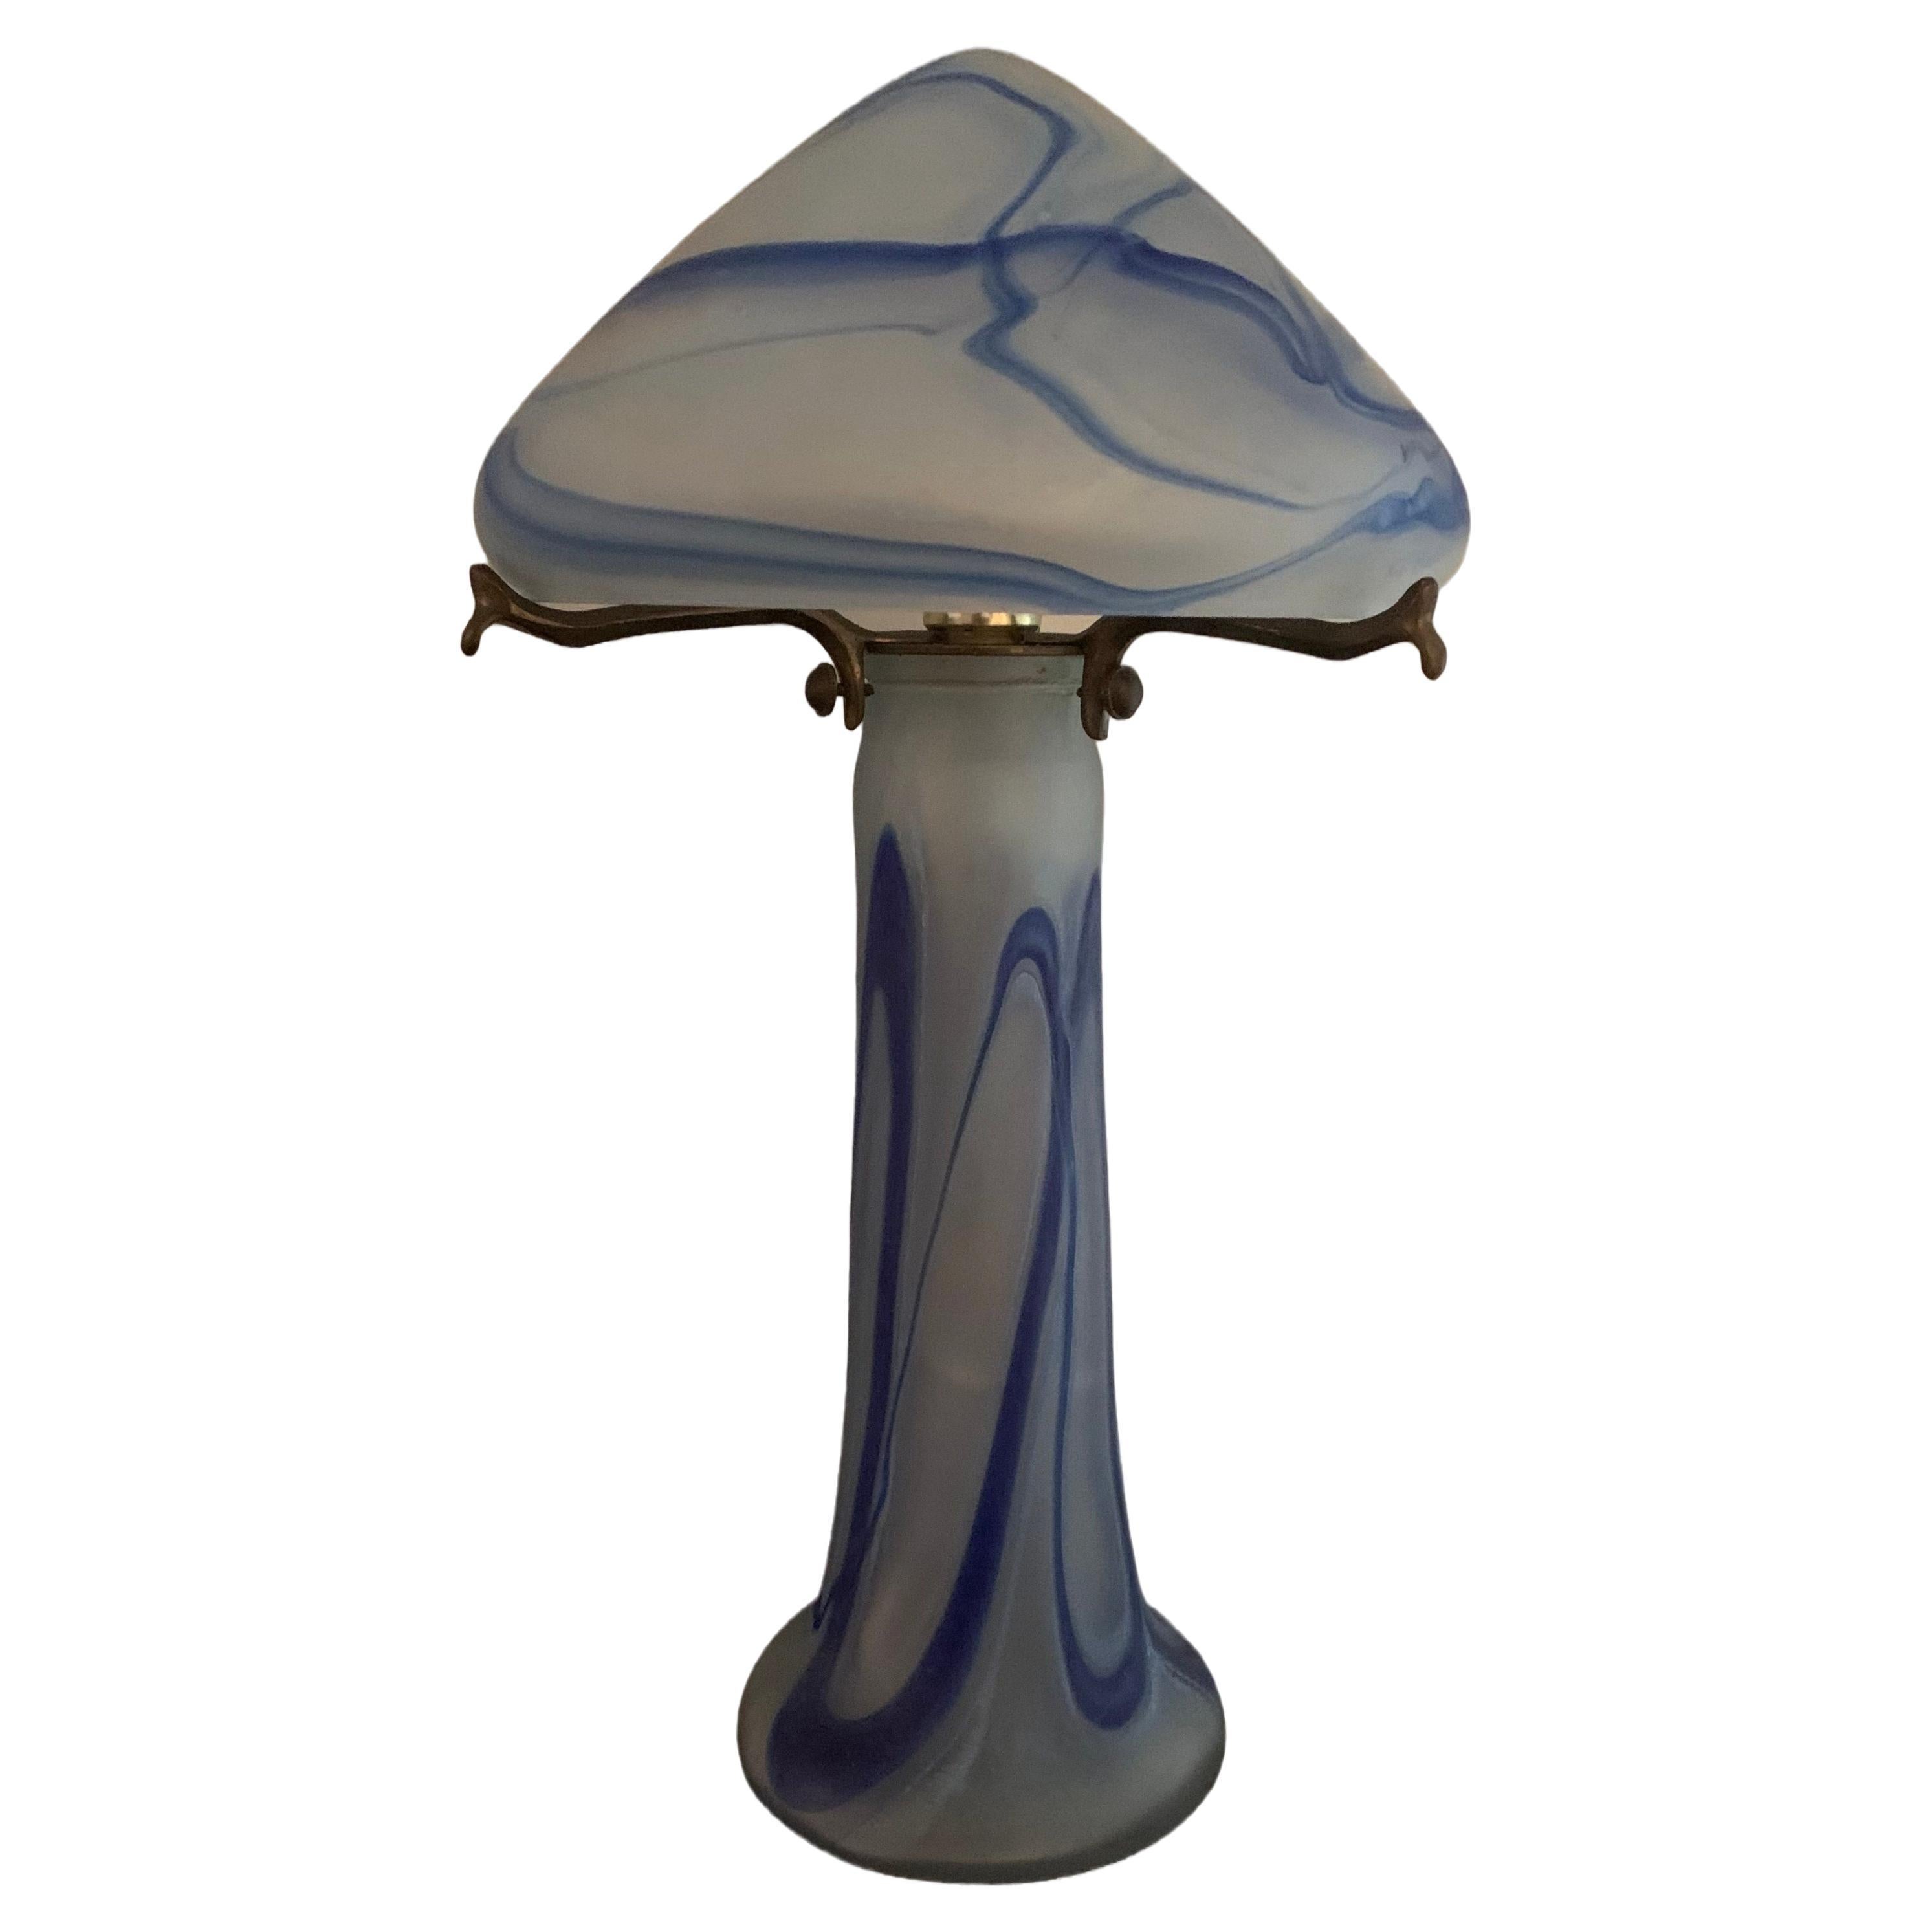 Antique French Art Nouveau Period Glass Lamp in Blue and White